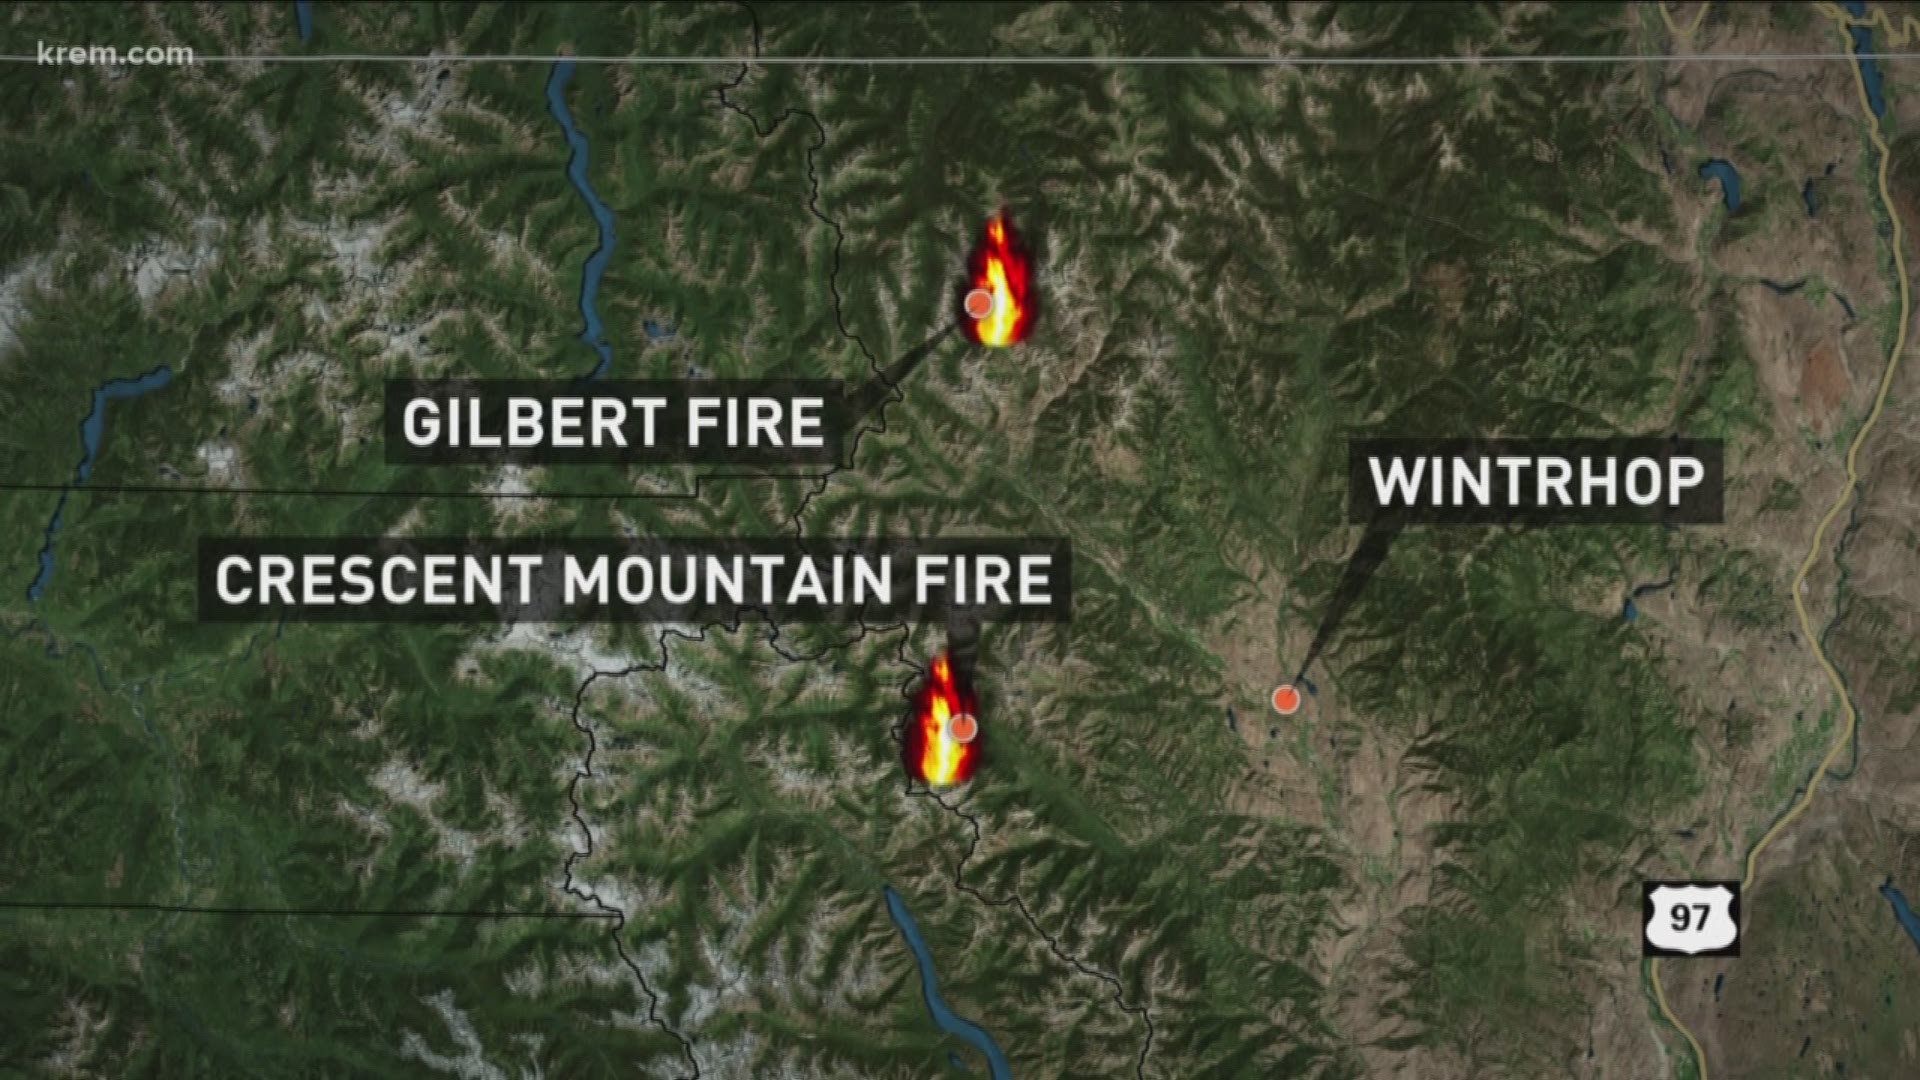 Level 2 evacuations in place for Crescent Mountain Fire burning in Okanogan Co. (8-8-18)